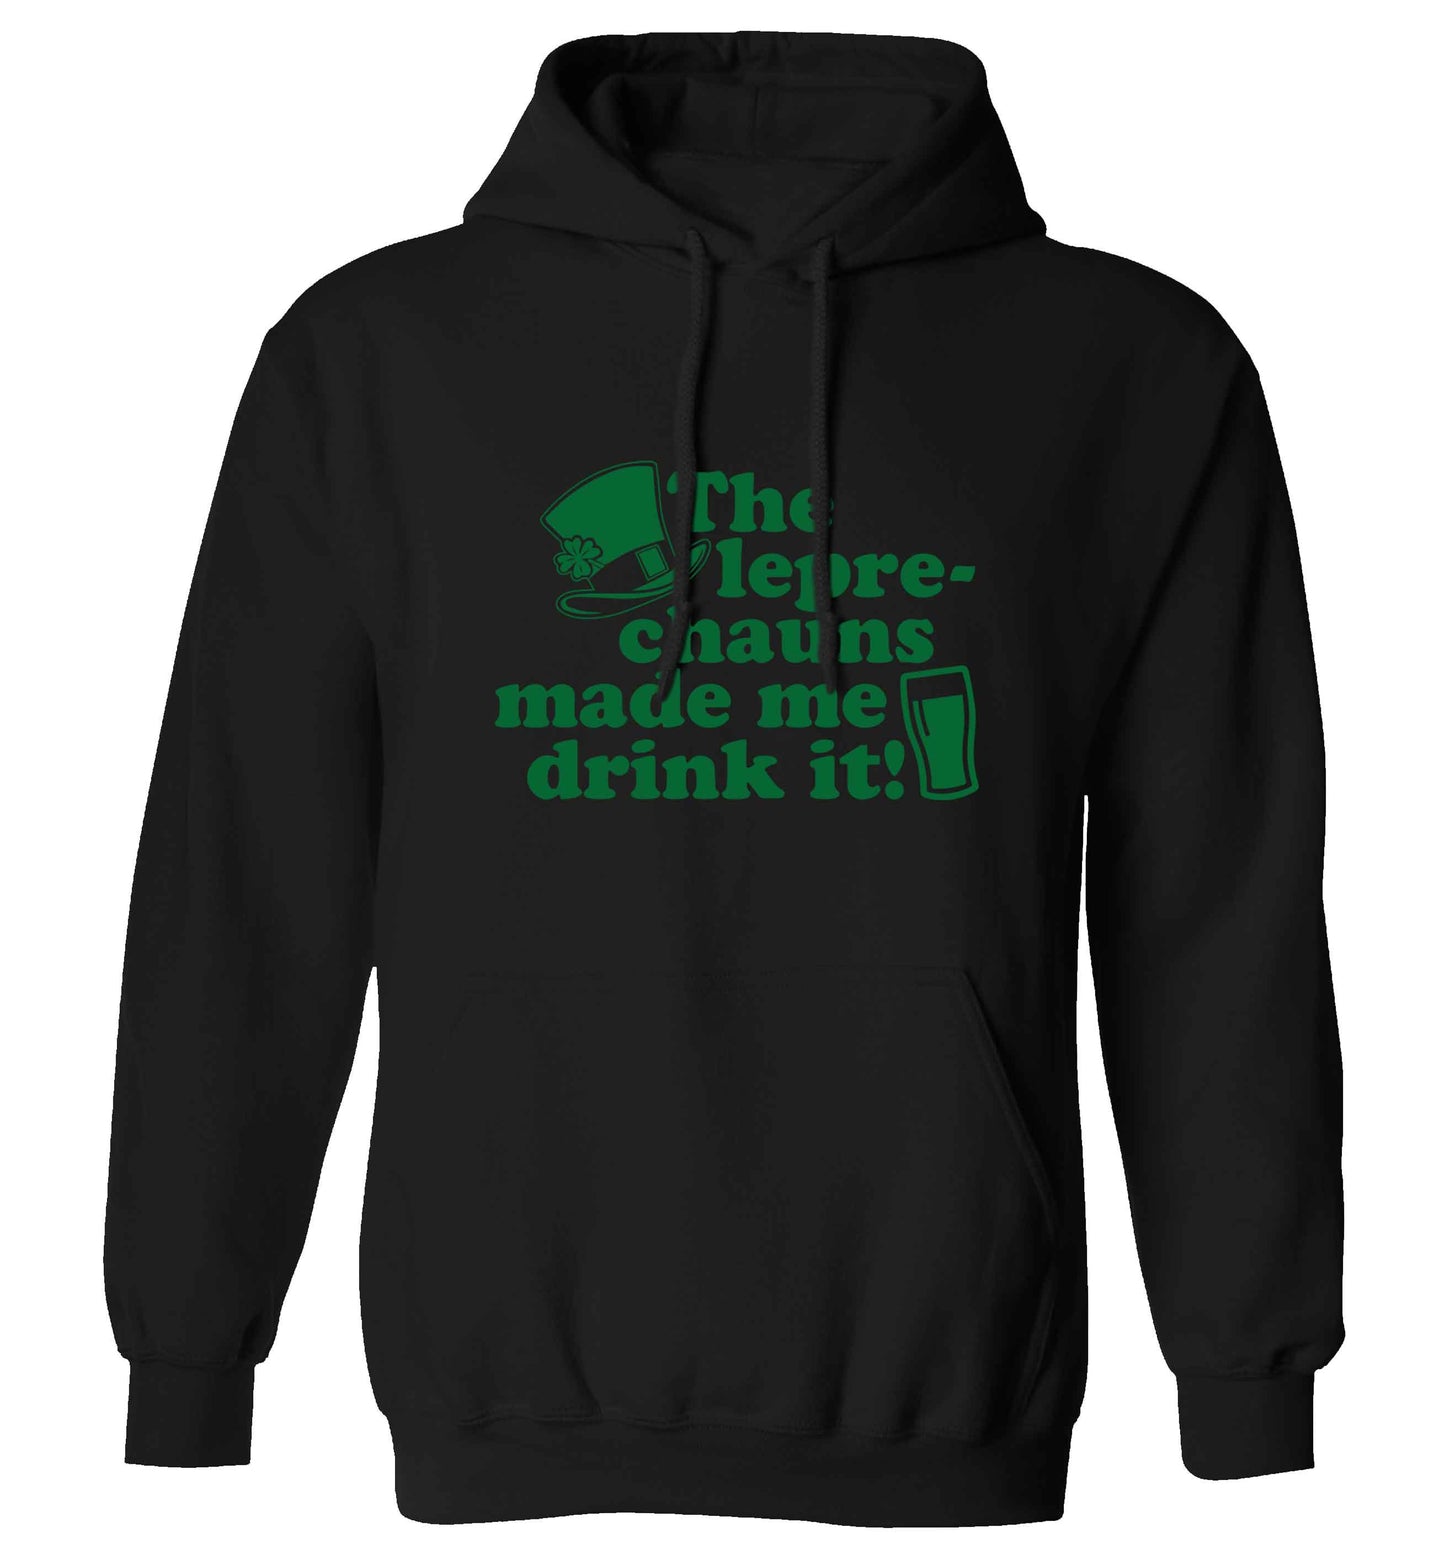 The leprechauns made me drink it adults unisex black hoodie 2XL